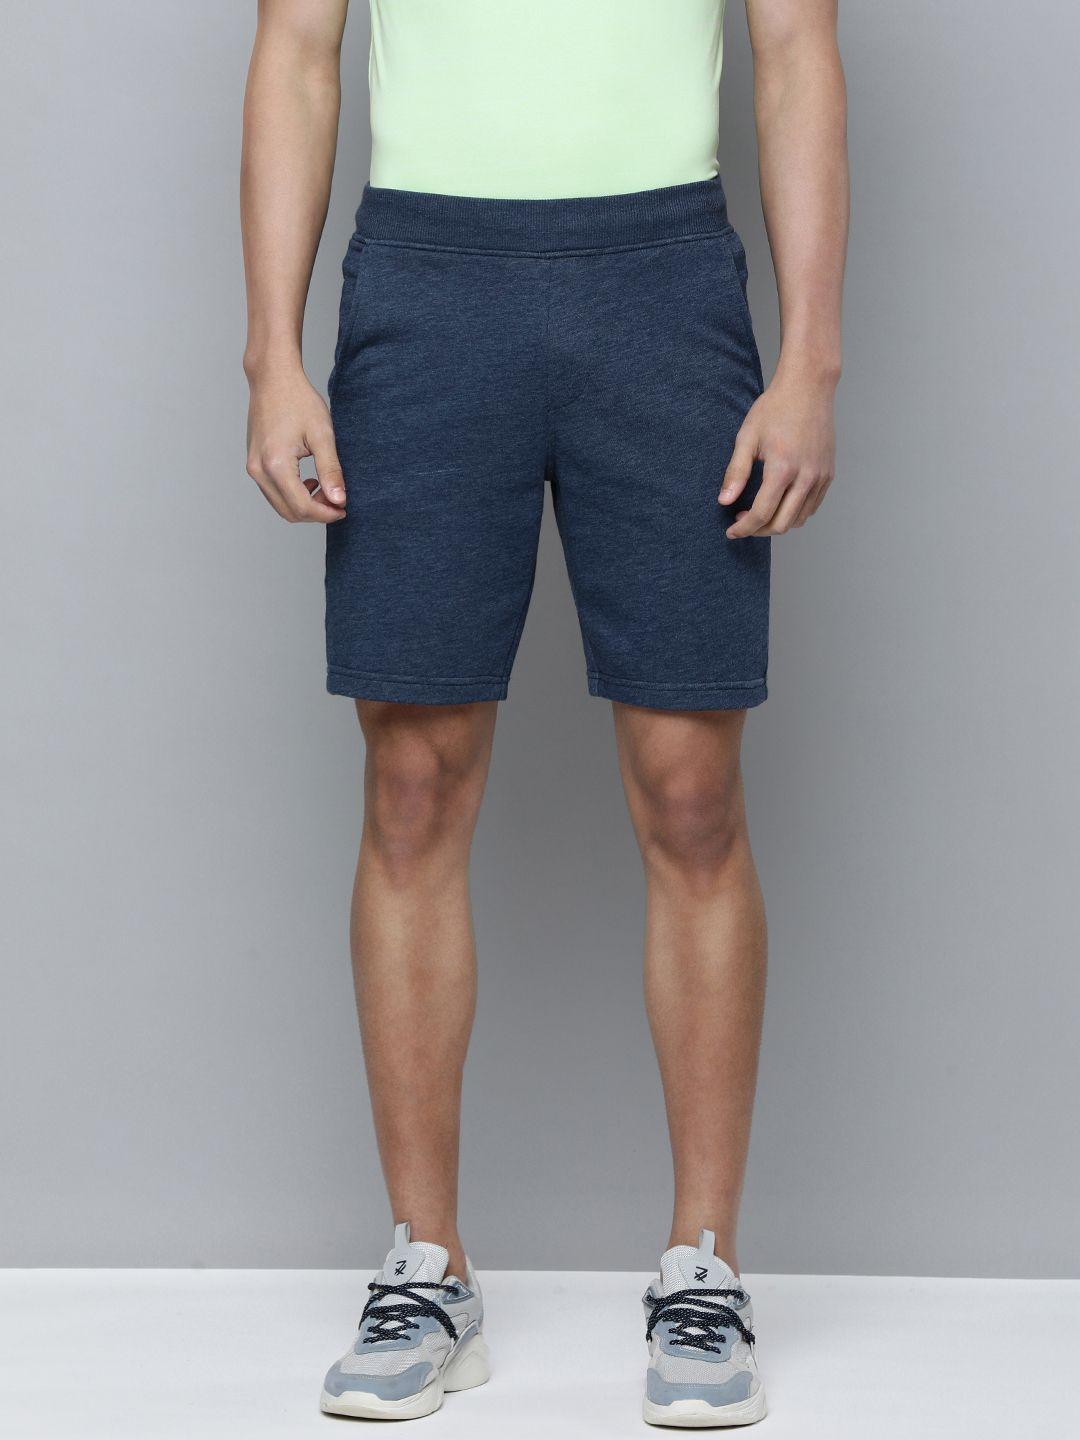 skechers-men-navy-solid-blue-sports-shorts-with-e-dry-technology-technology